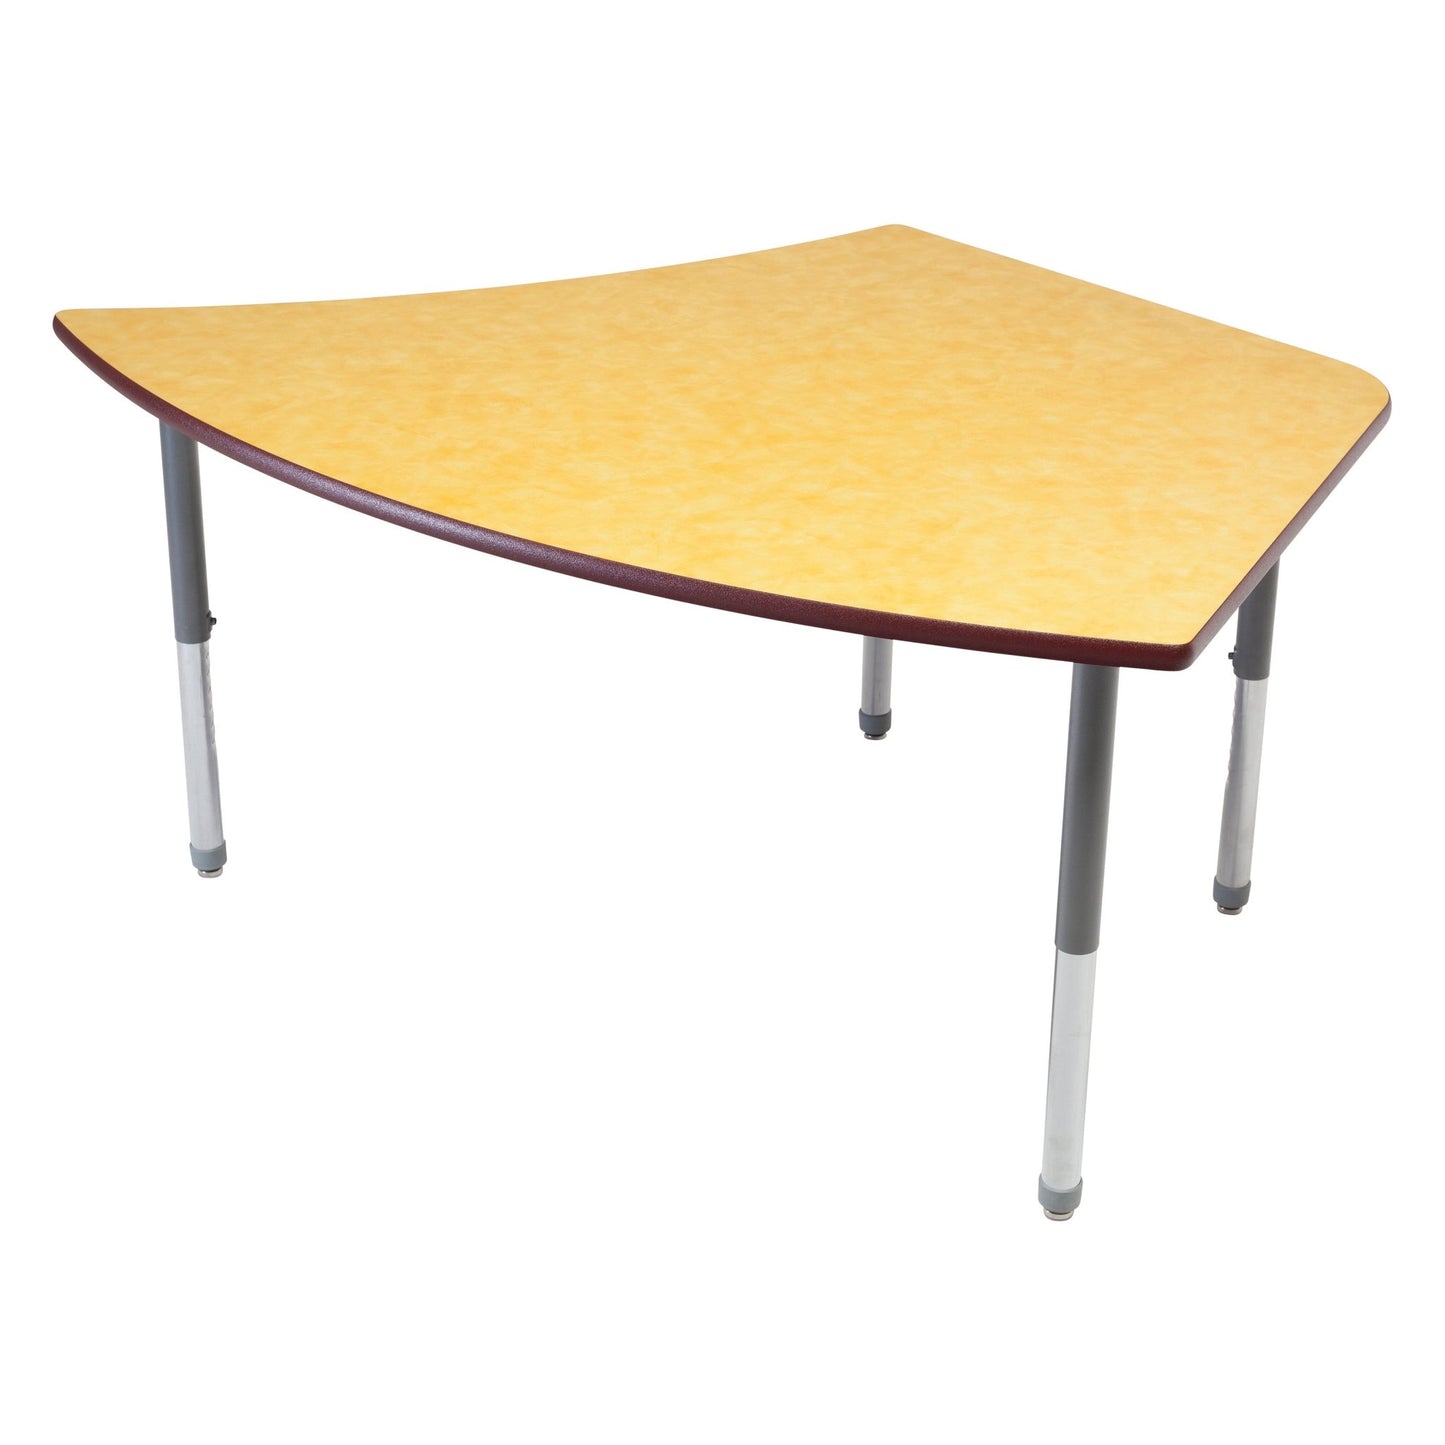 AmTab Multi-Functional Collaborative Activity Table - Creed Collection - Rebound - 30"W x 60"L (AmTab AMT-AAR305D) - SchoolOutlet